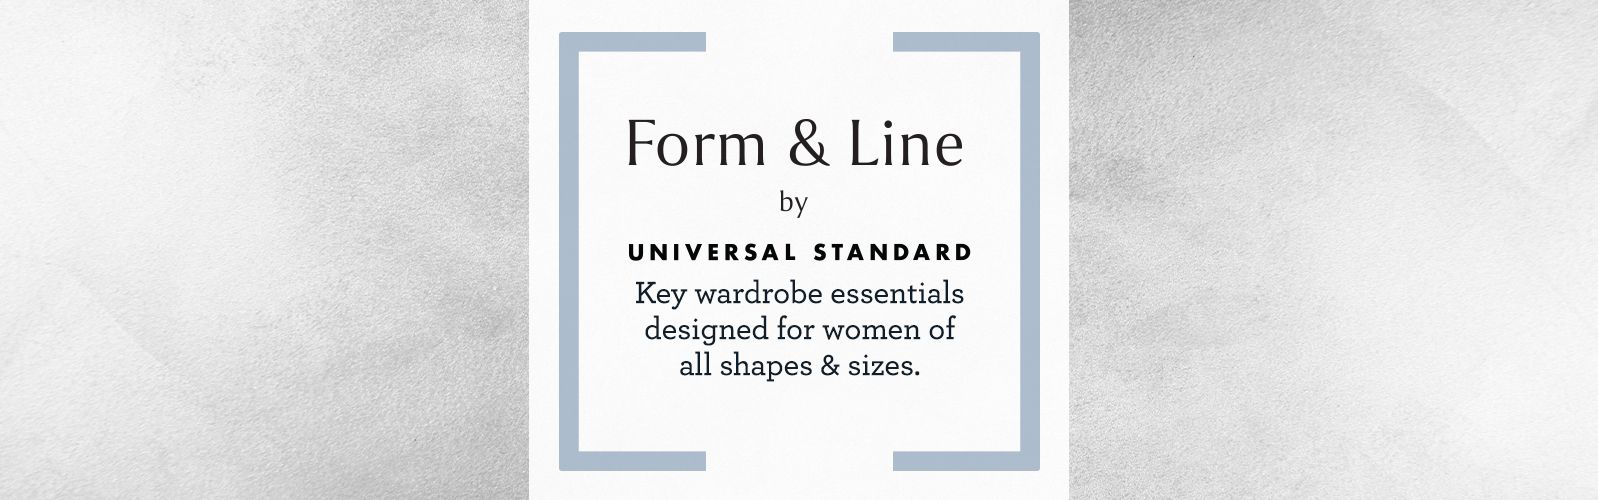 Form & Line by Universal Standard  Inclusive Fashion Brand 